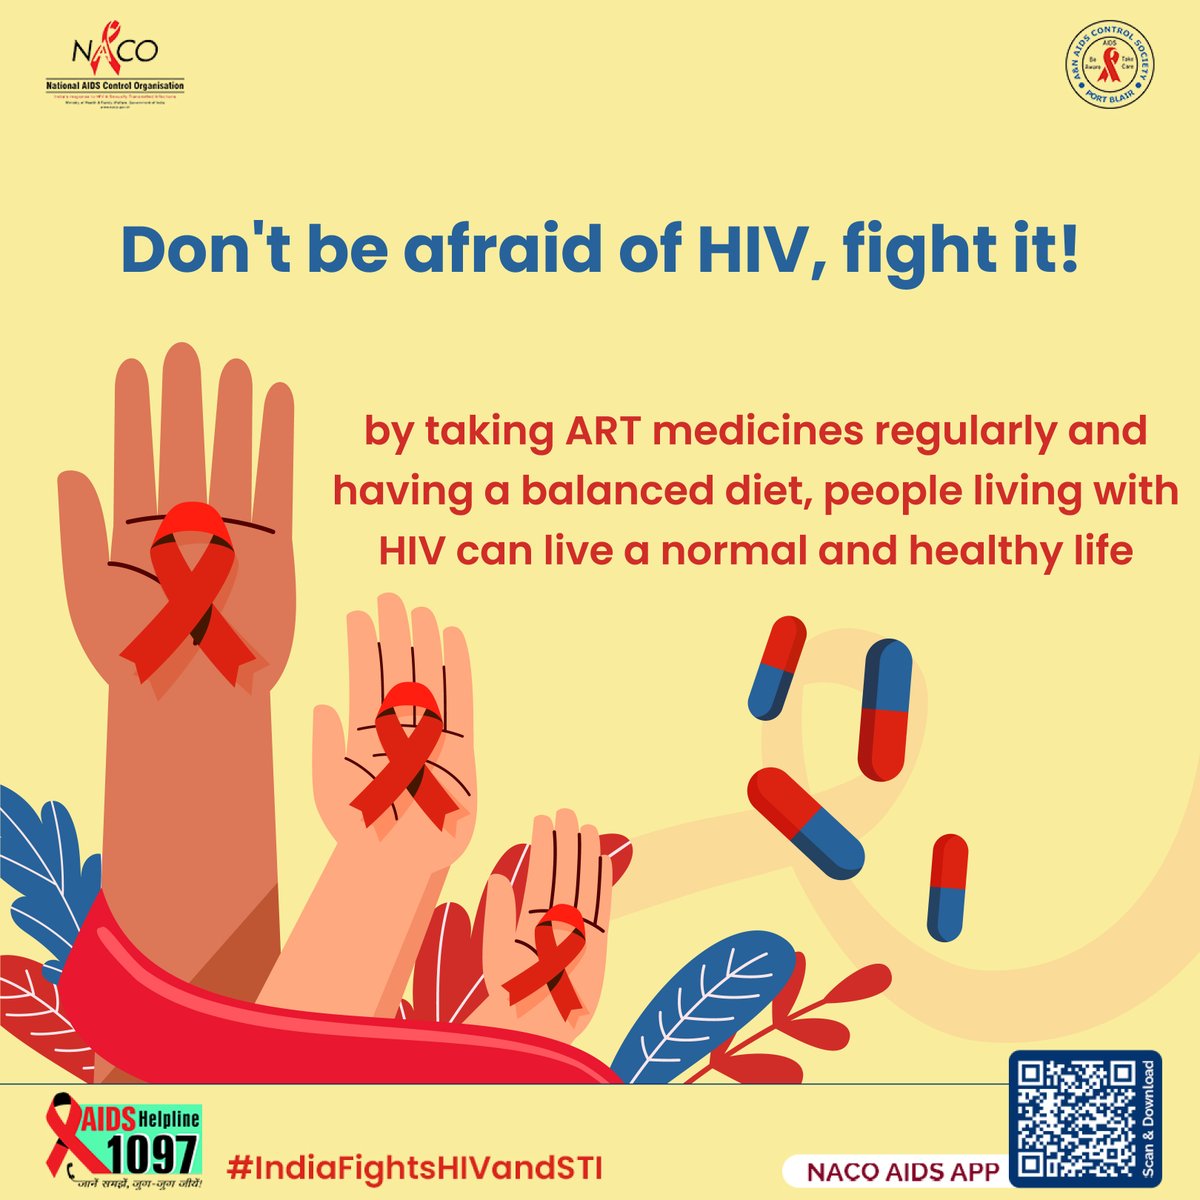 Fight HIV confidently with ART medicines, a balanced diet, regular checkups. Live fully despite HIV; prioritize health. Take charge!🛡️🥗🩺 #NACO #AIDS #HIV #AndamanNicobar #HIVAwareness